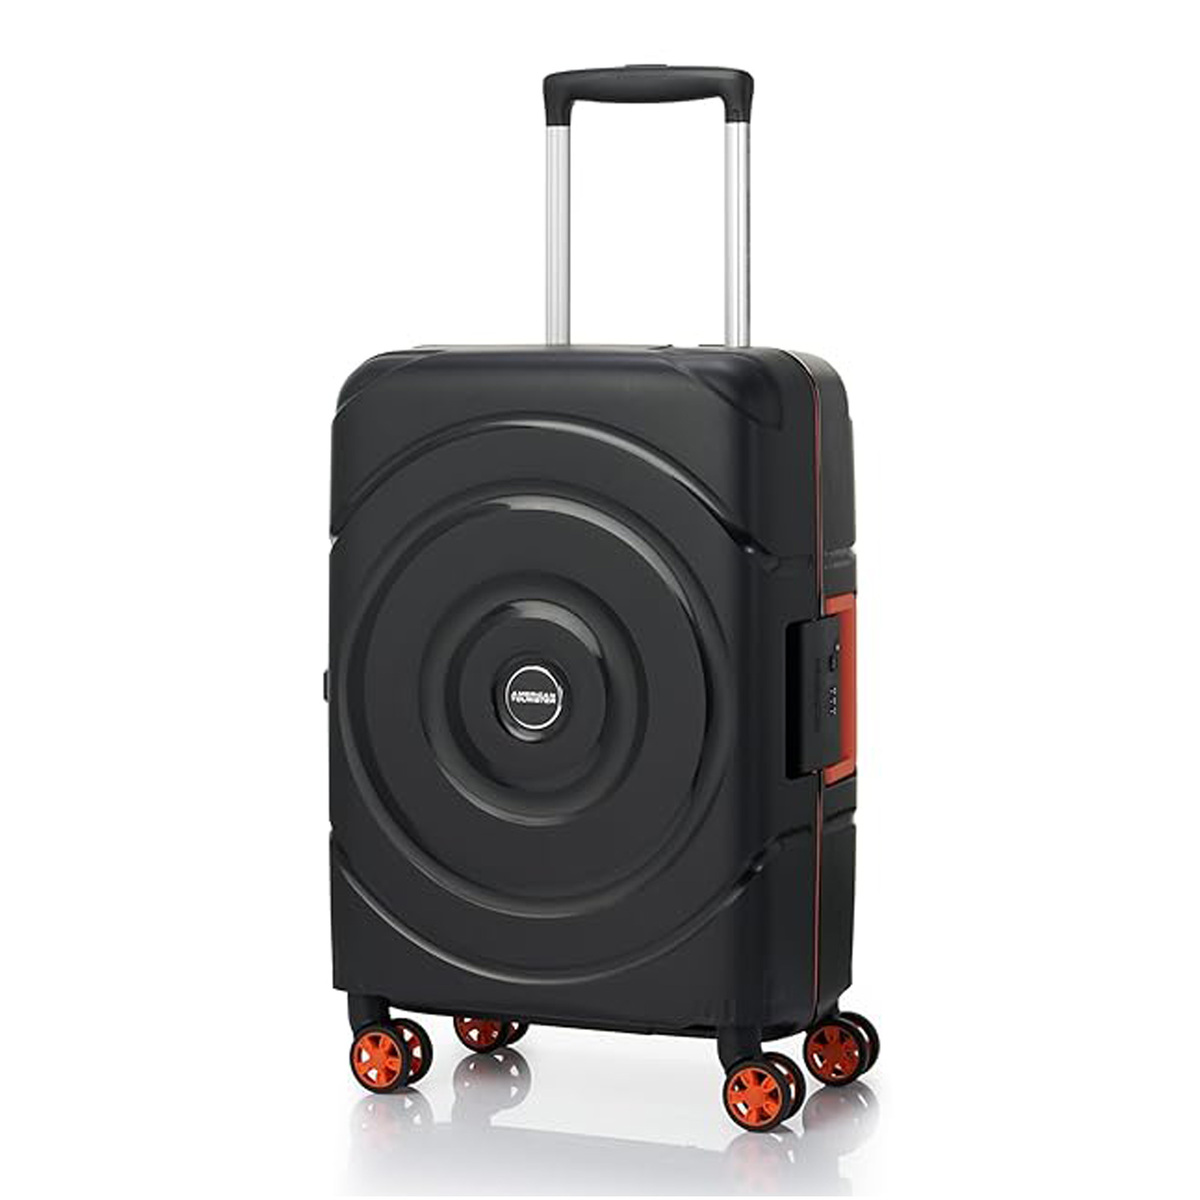 American Tourister Circurity Spinner Hard Trolley with TSA Combination Lock, 68 cm, Black